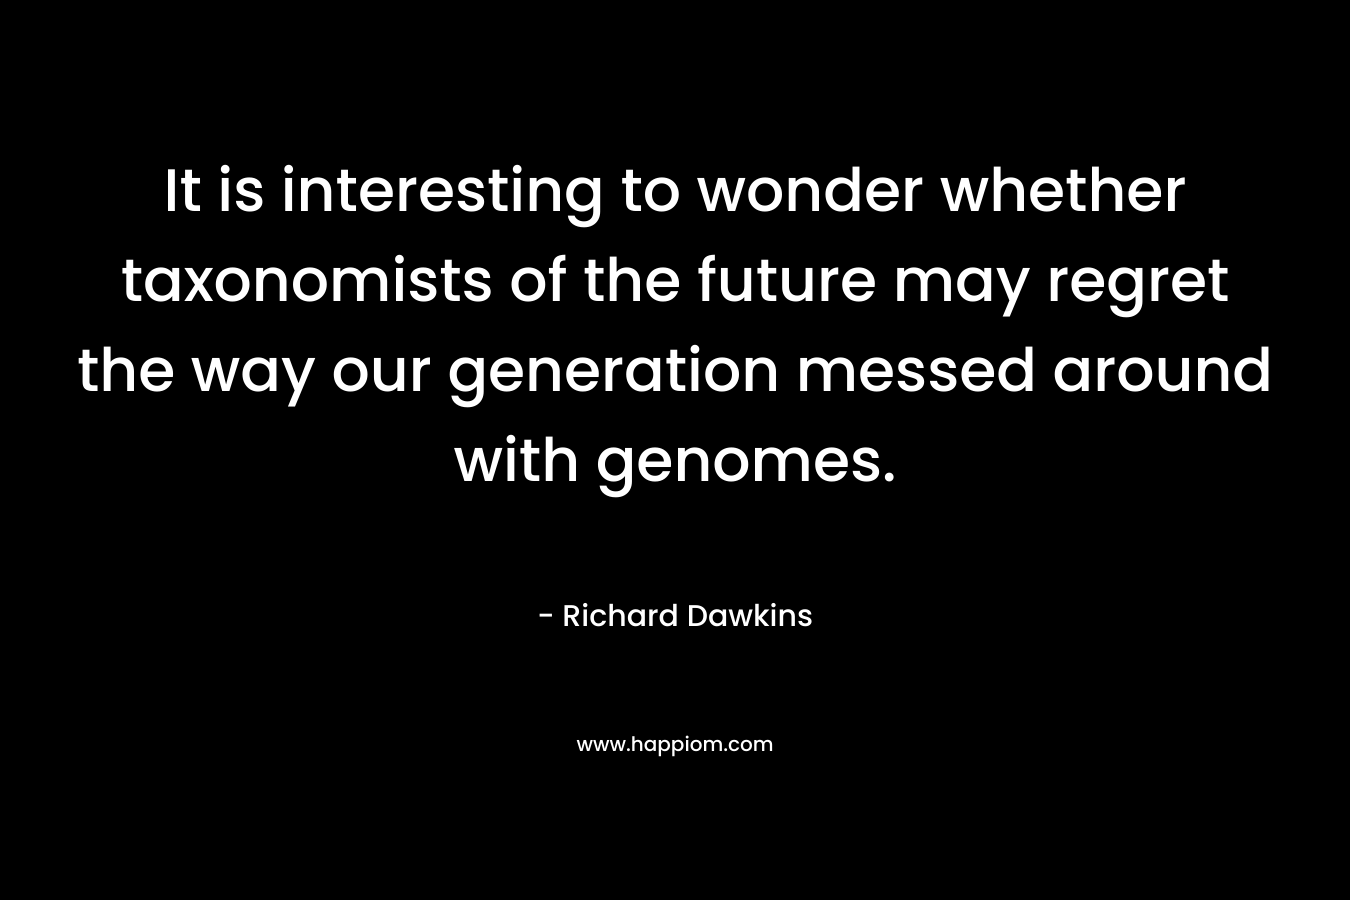 It is interesting to wonder whether taxonomists of the future may regret the way our generation messed around with genomes. – Richard Dawkins